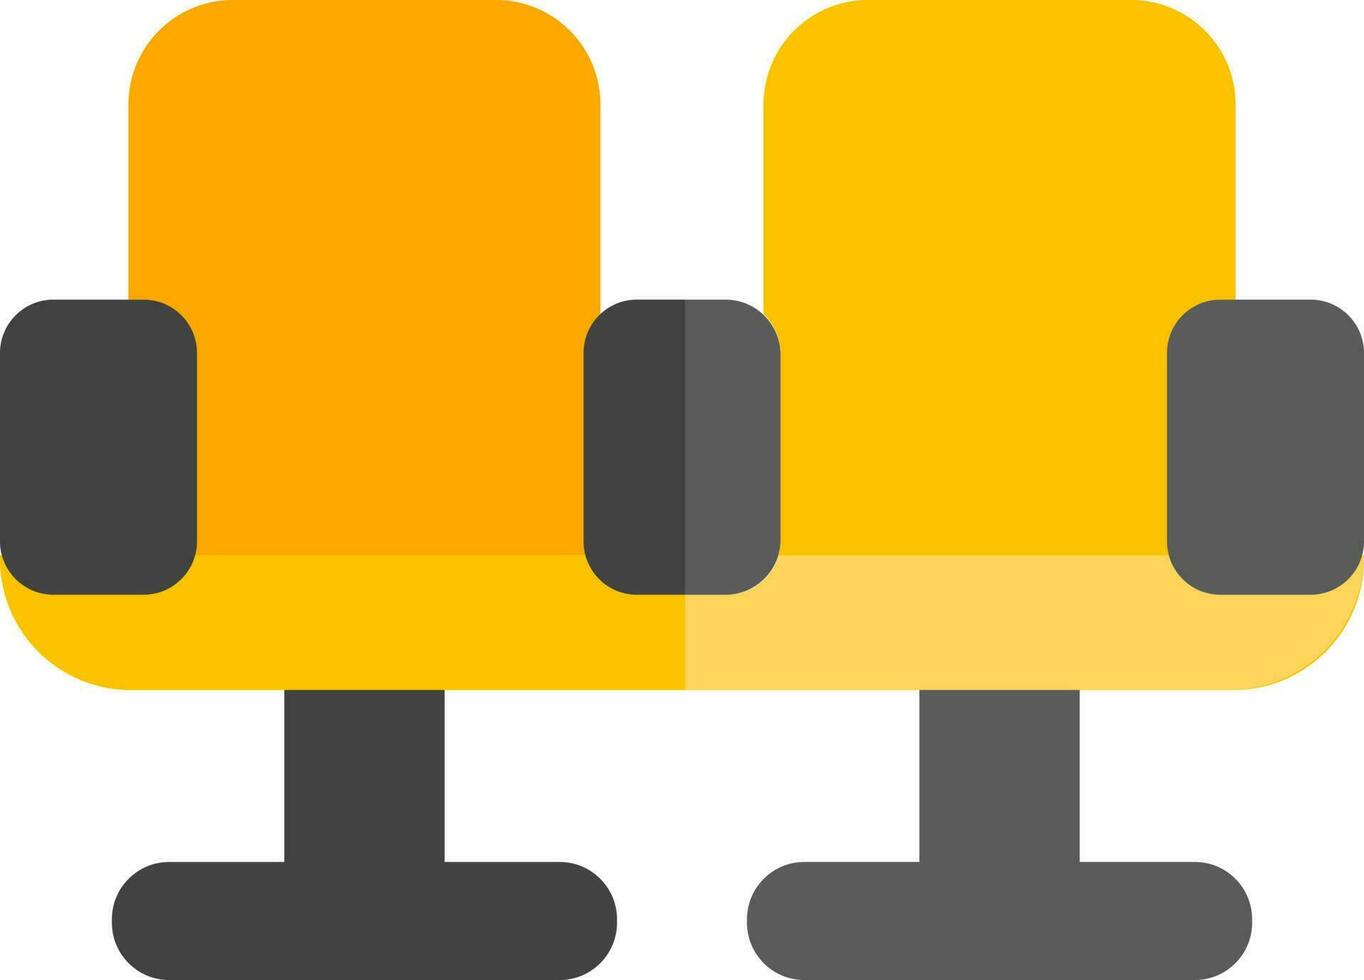 Seats icon in yellow and black color. vector